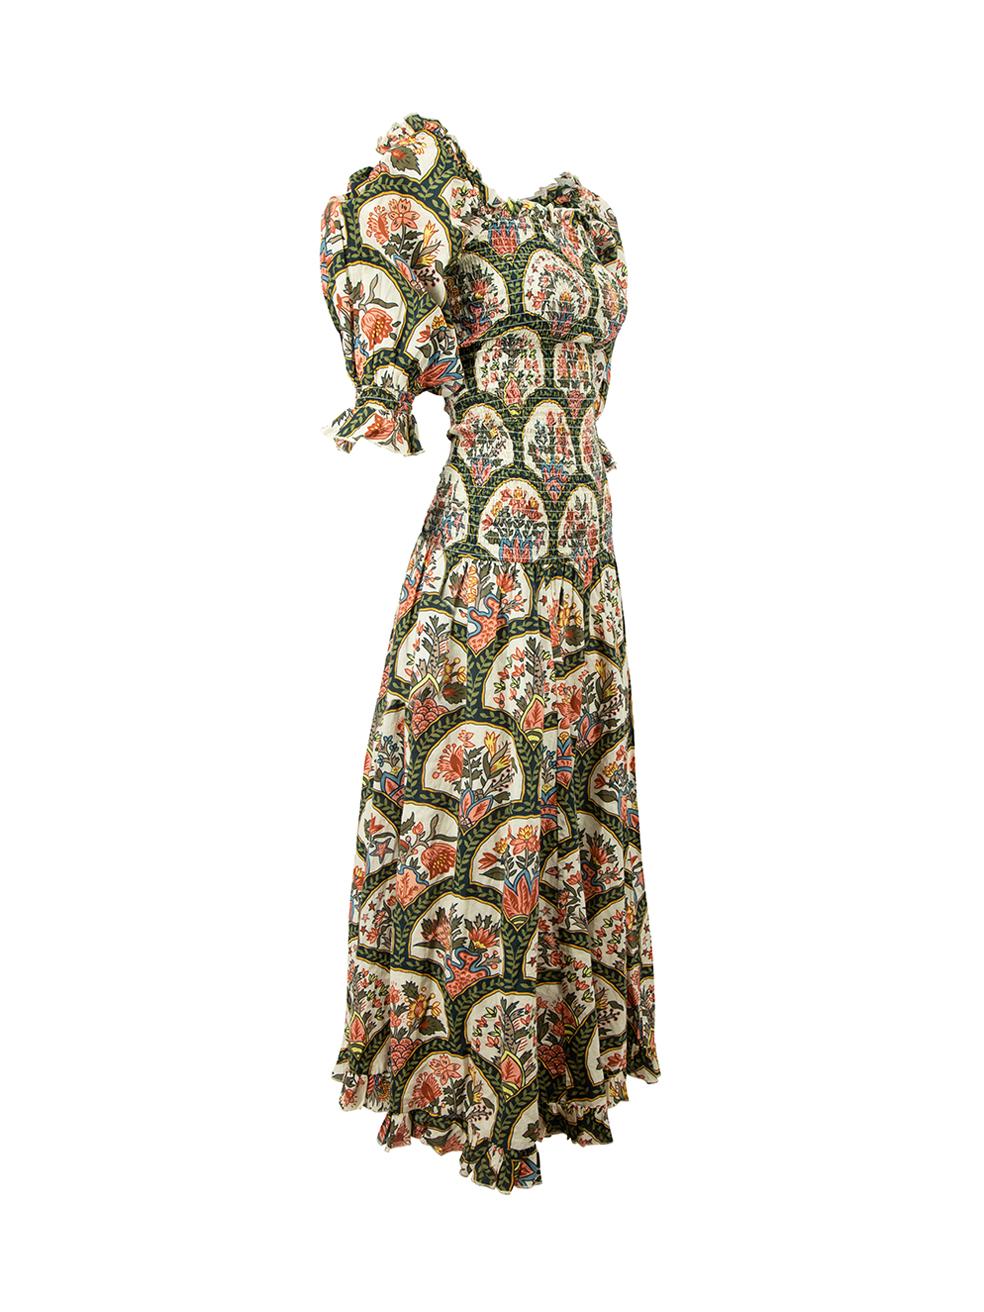 CONDITION is Very good. Hardly any visible wear to dress is evident on this used Rhode designer resale item.




Details


Green

Cotton

Midi dress

Floral motif print pattern

Off the shoulder

Elasticated neckline and cuffs

Shirred on top